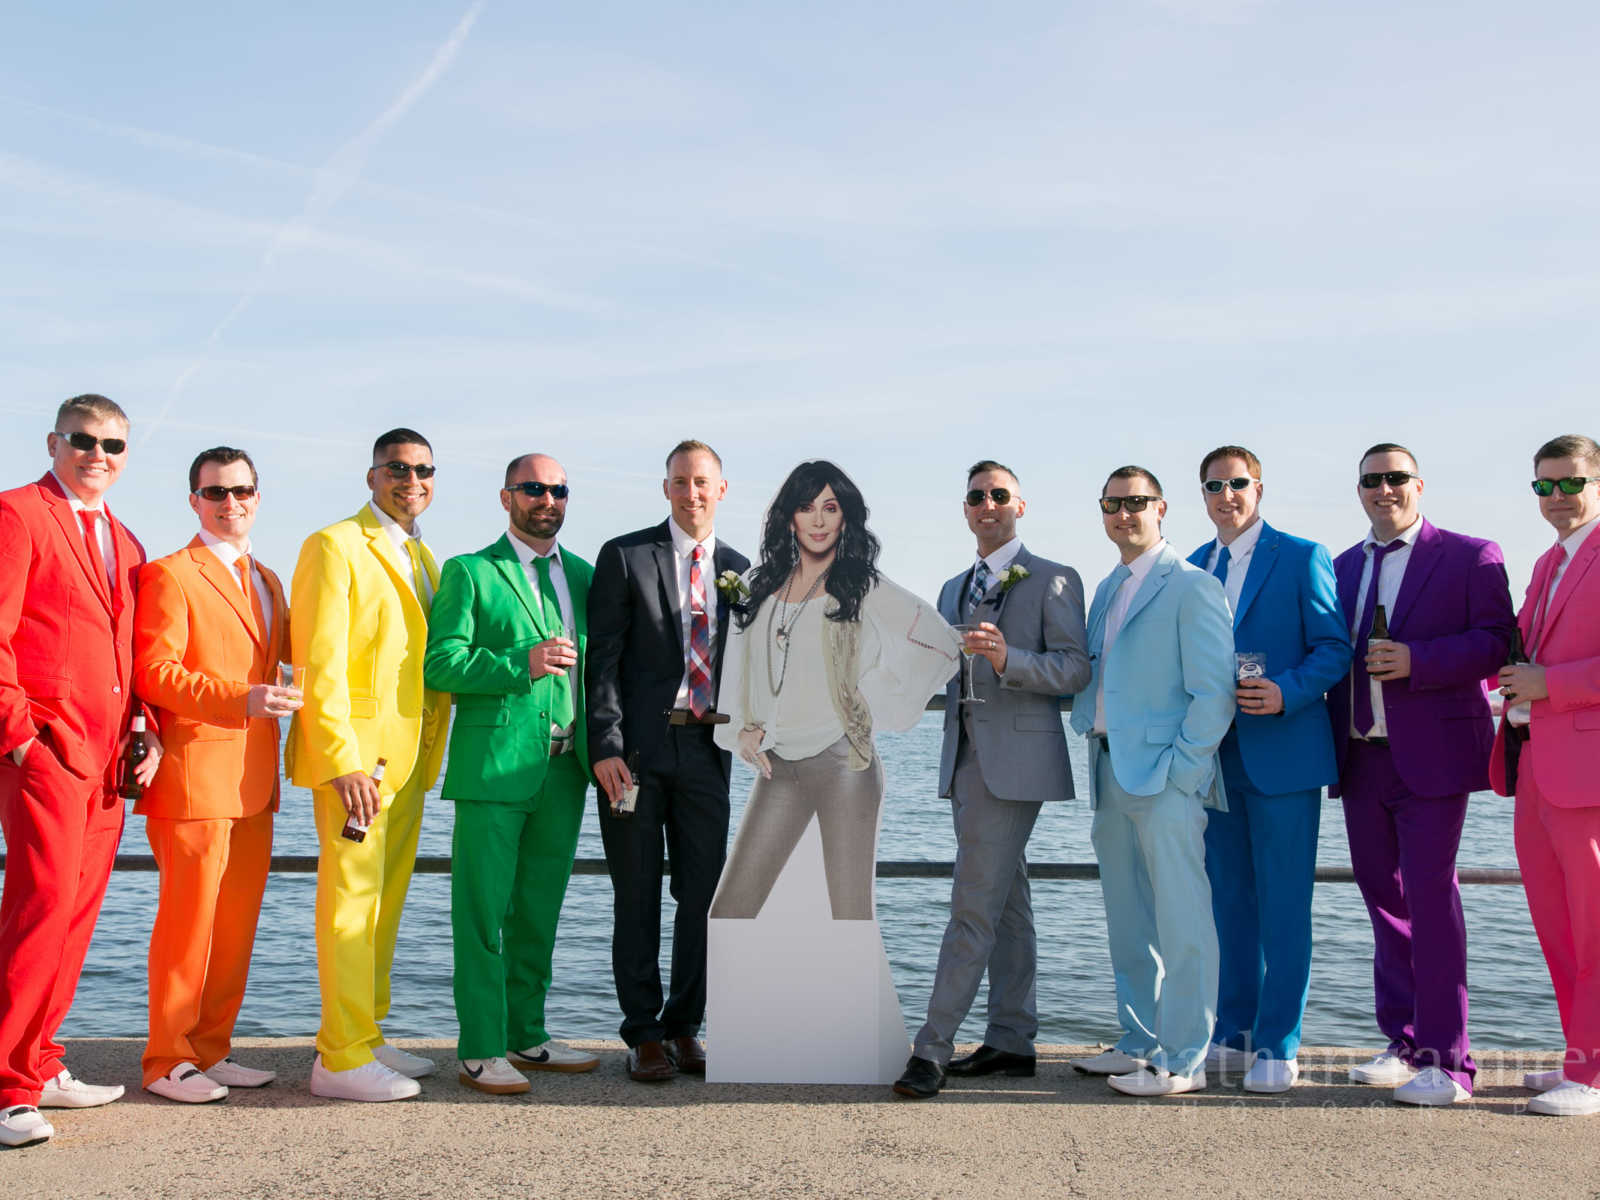 Grooms standing on pier with cutout of Celine Dion in between them and men in colorful suits on either side of them